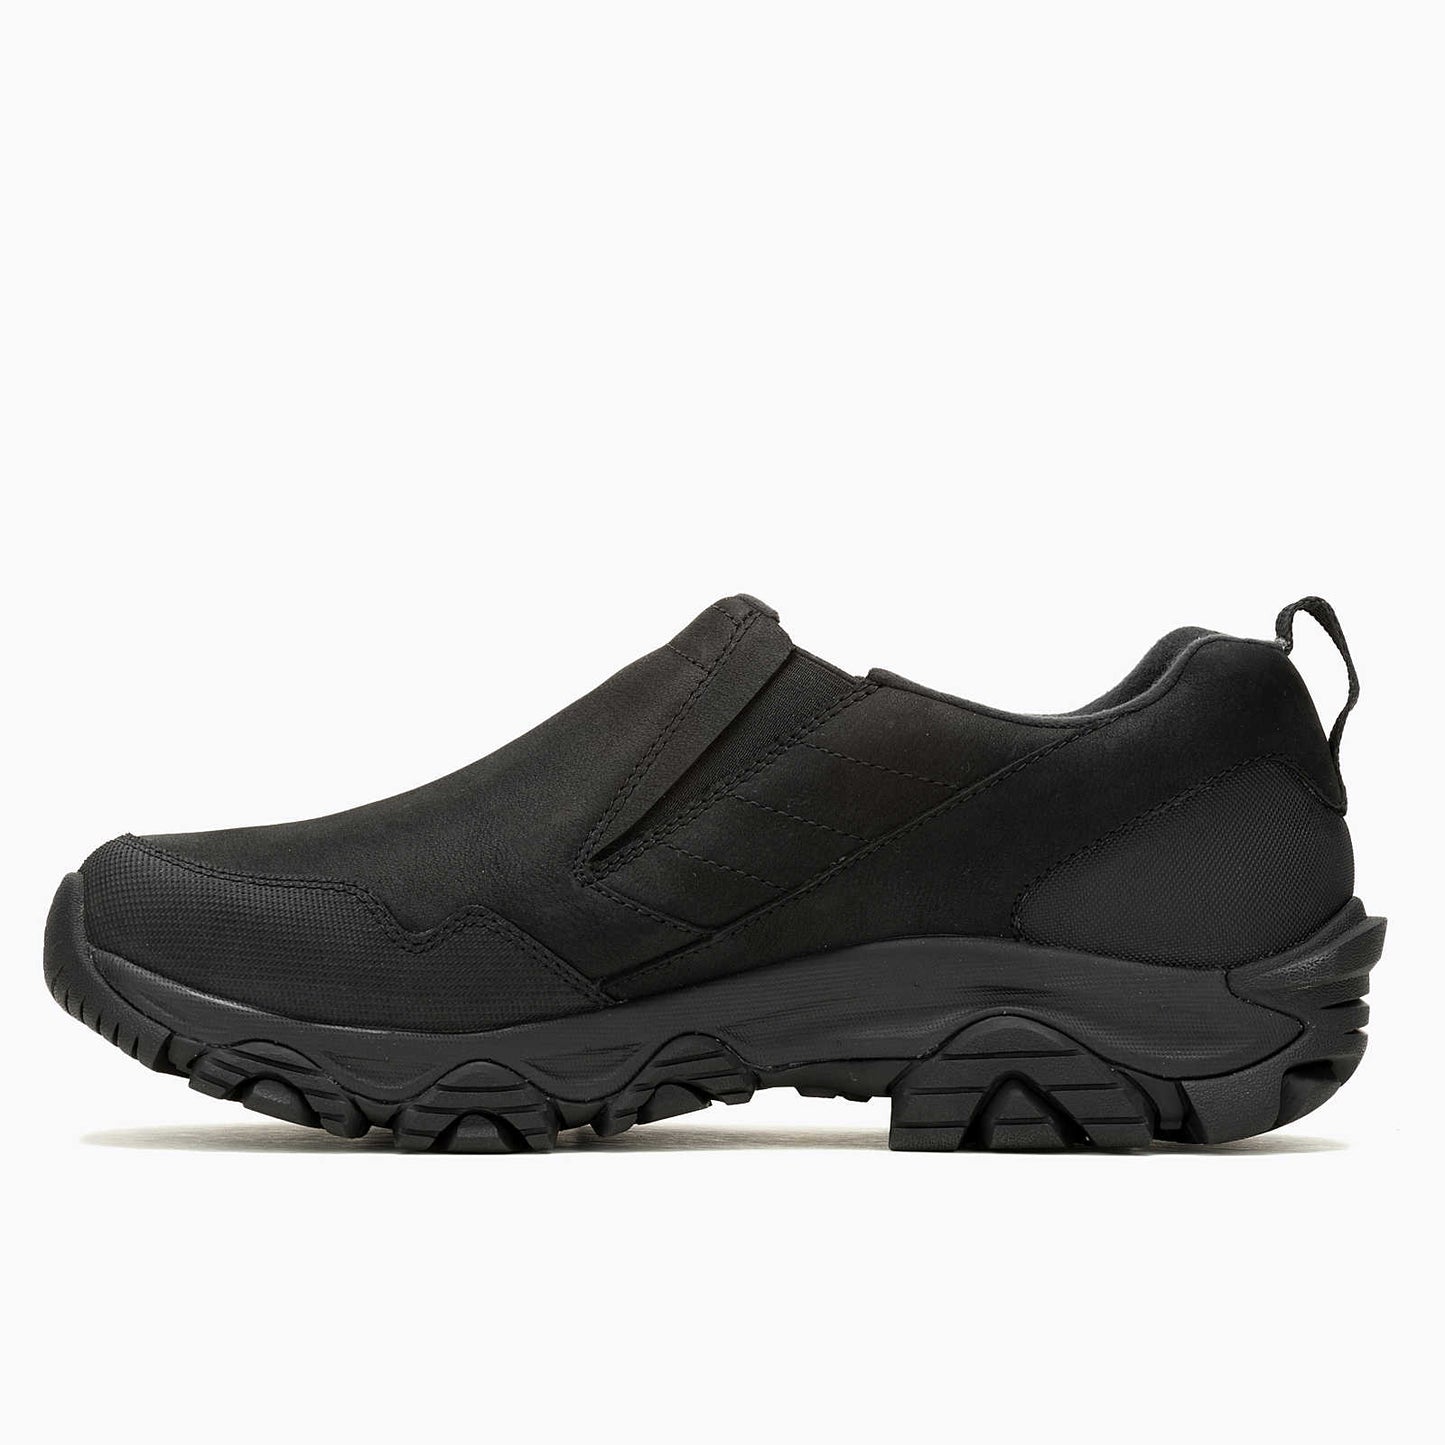 Merrell - ColdPack 3 Thermo Moc - Waterproof Black Leather